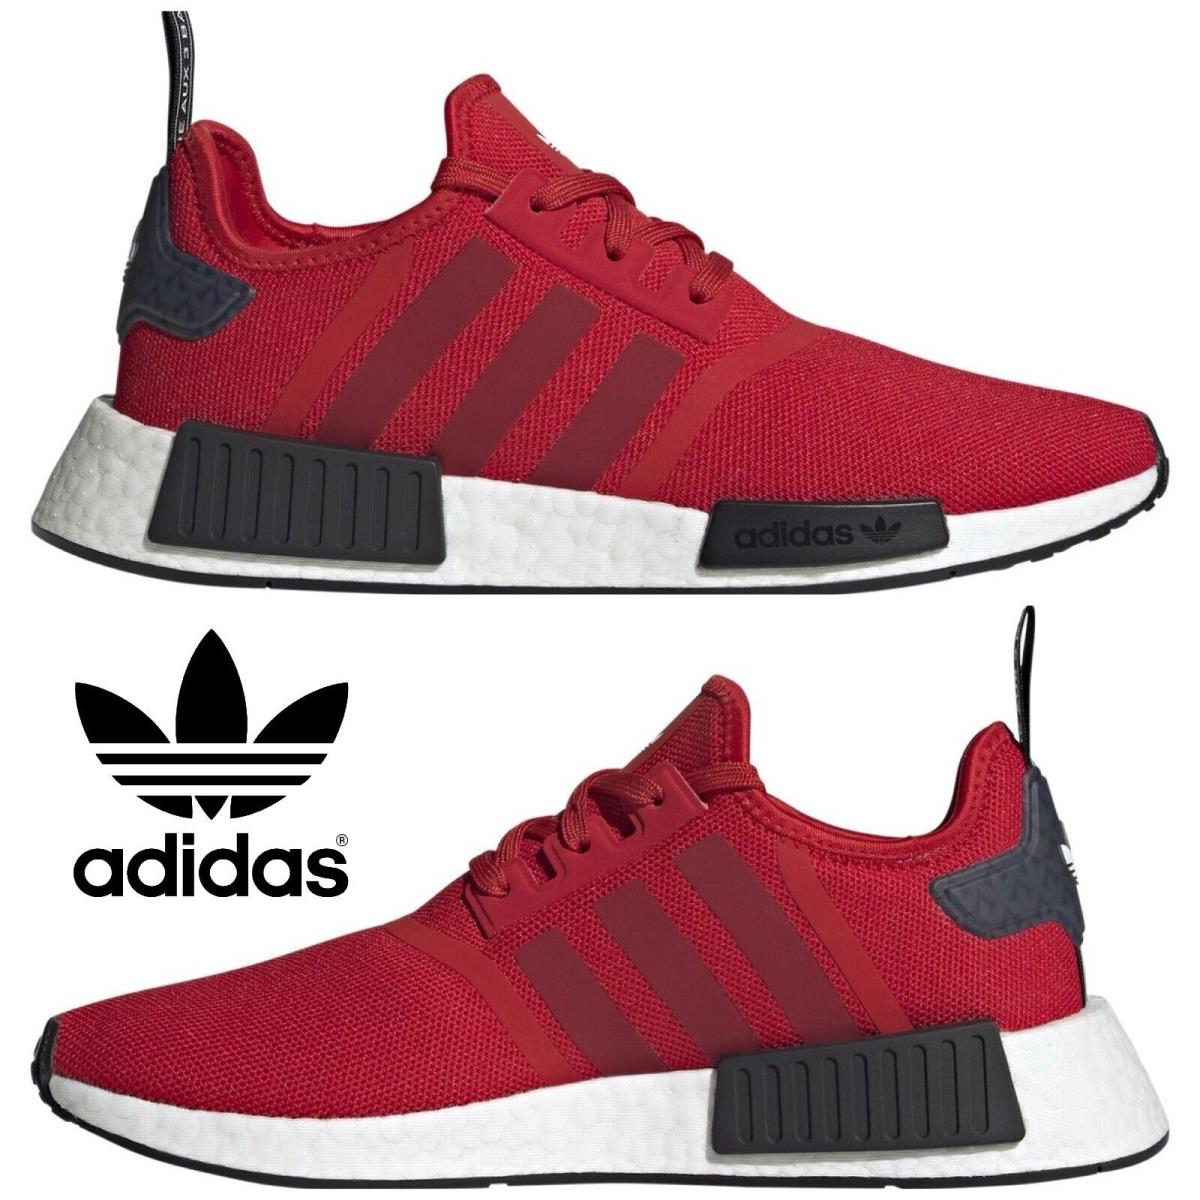 Adidas Originals Nmd R1 Men`s Sneakers Running Shoes Gym Casual Sport Red